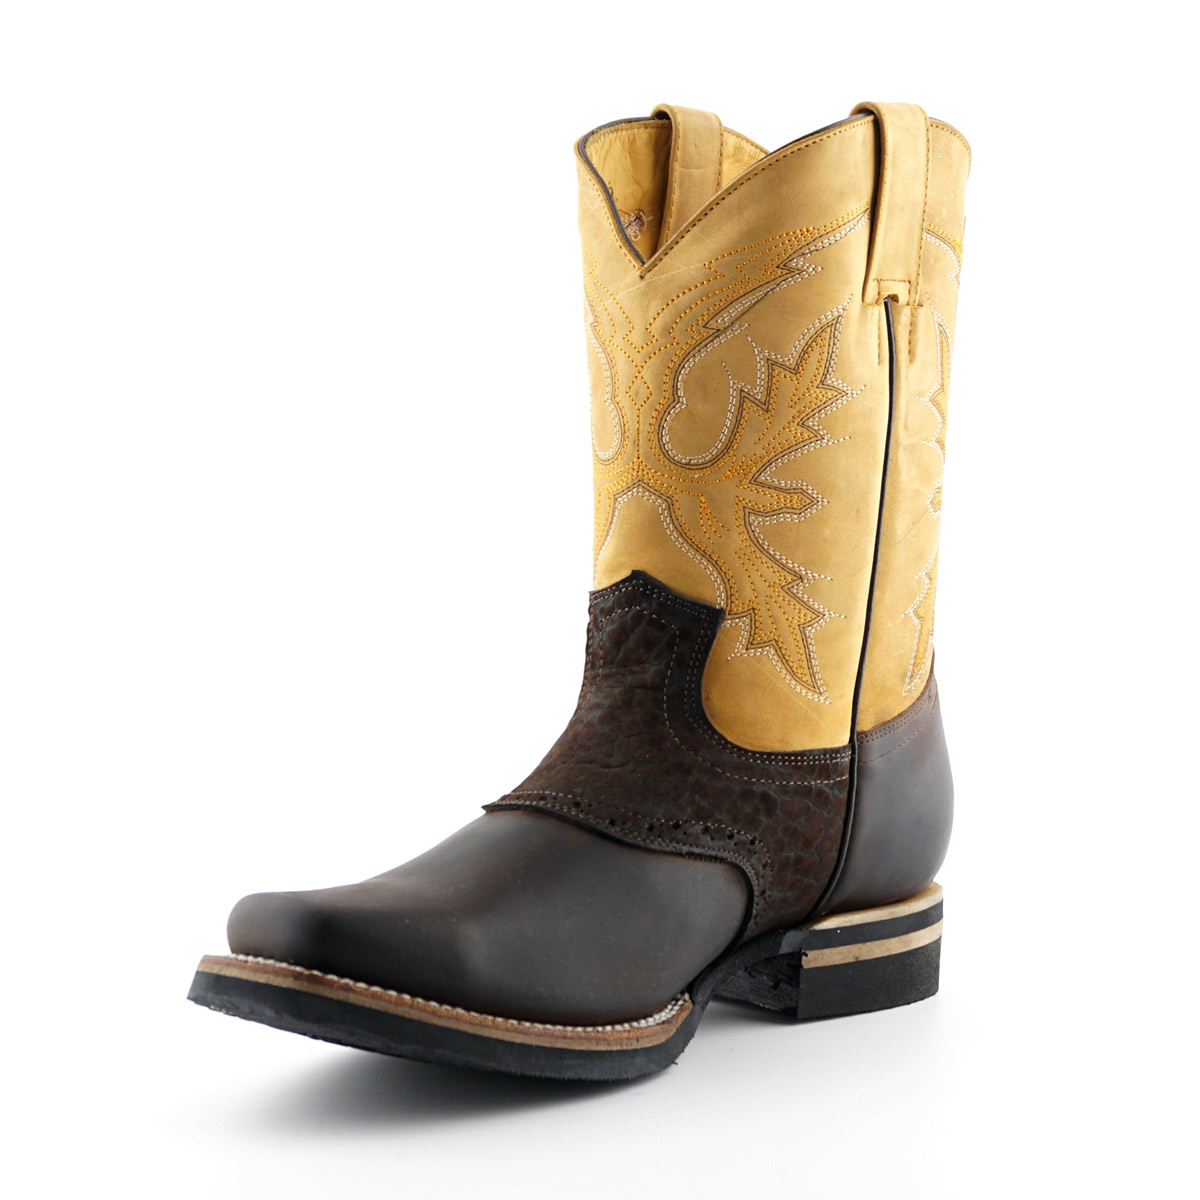 Western boots Frontier Goodyear Welted Leather upper Soft Leather lining Rubber Soles Made in Mexico str 37-46 Pris 1950-,